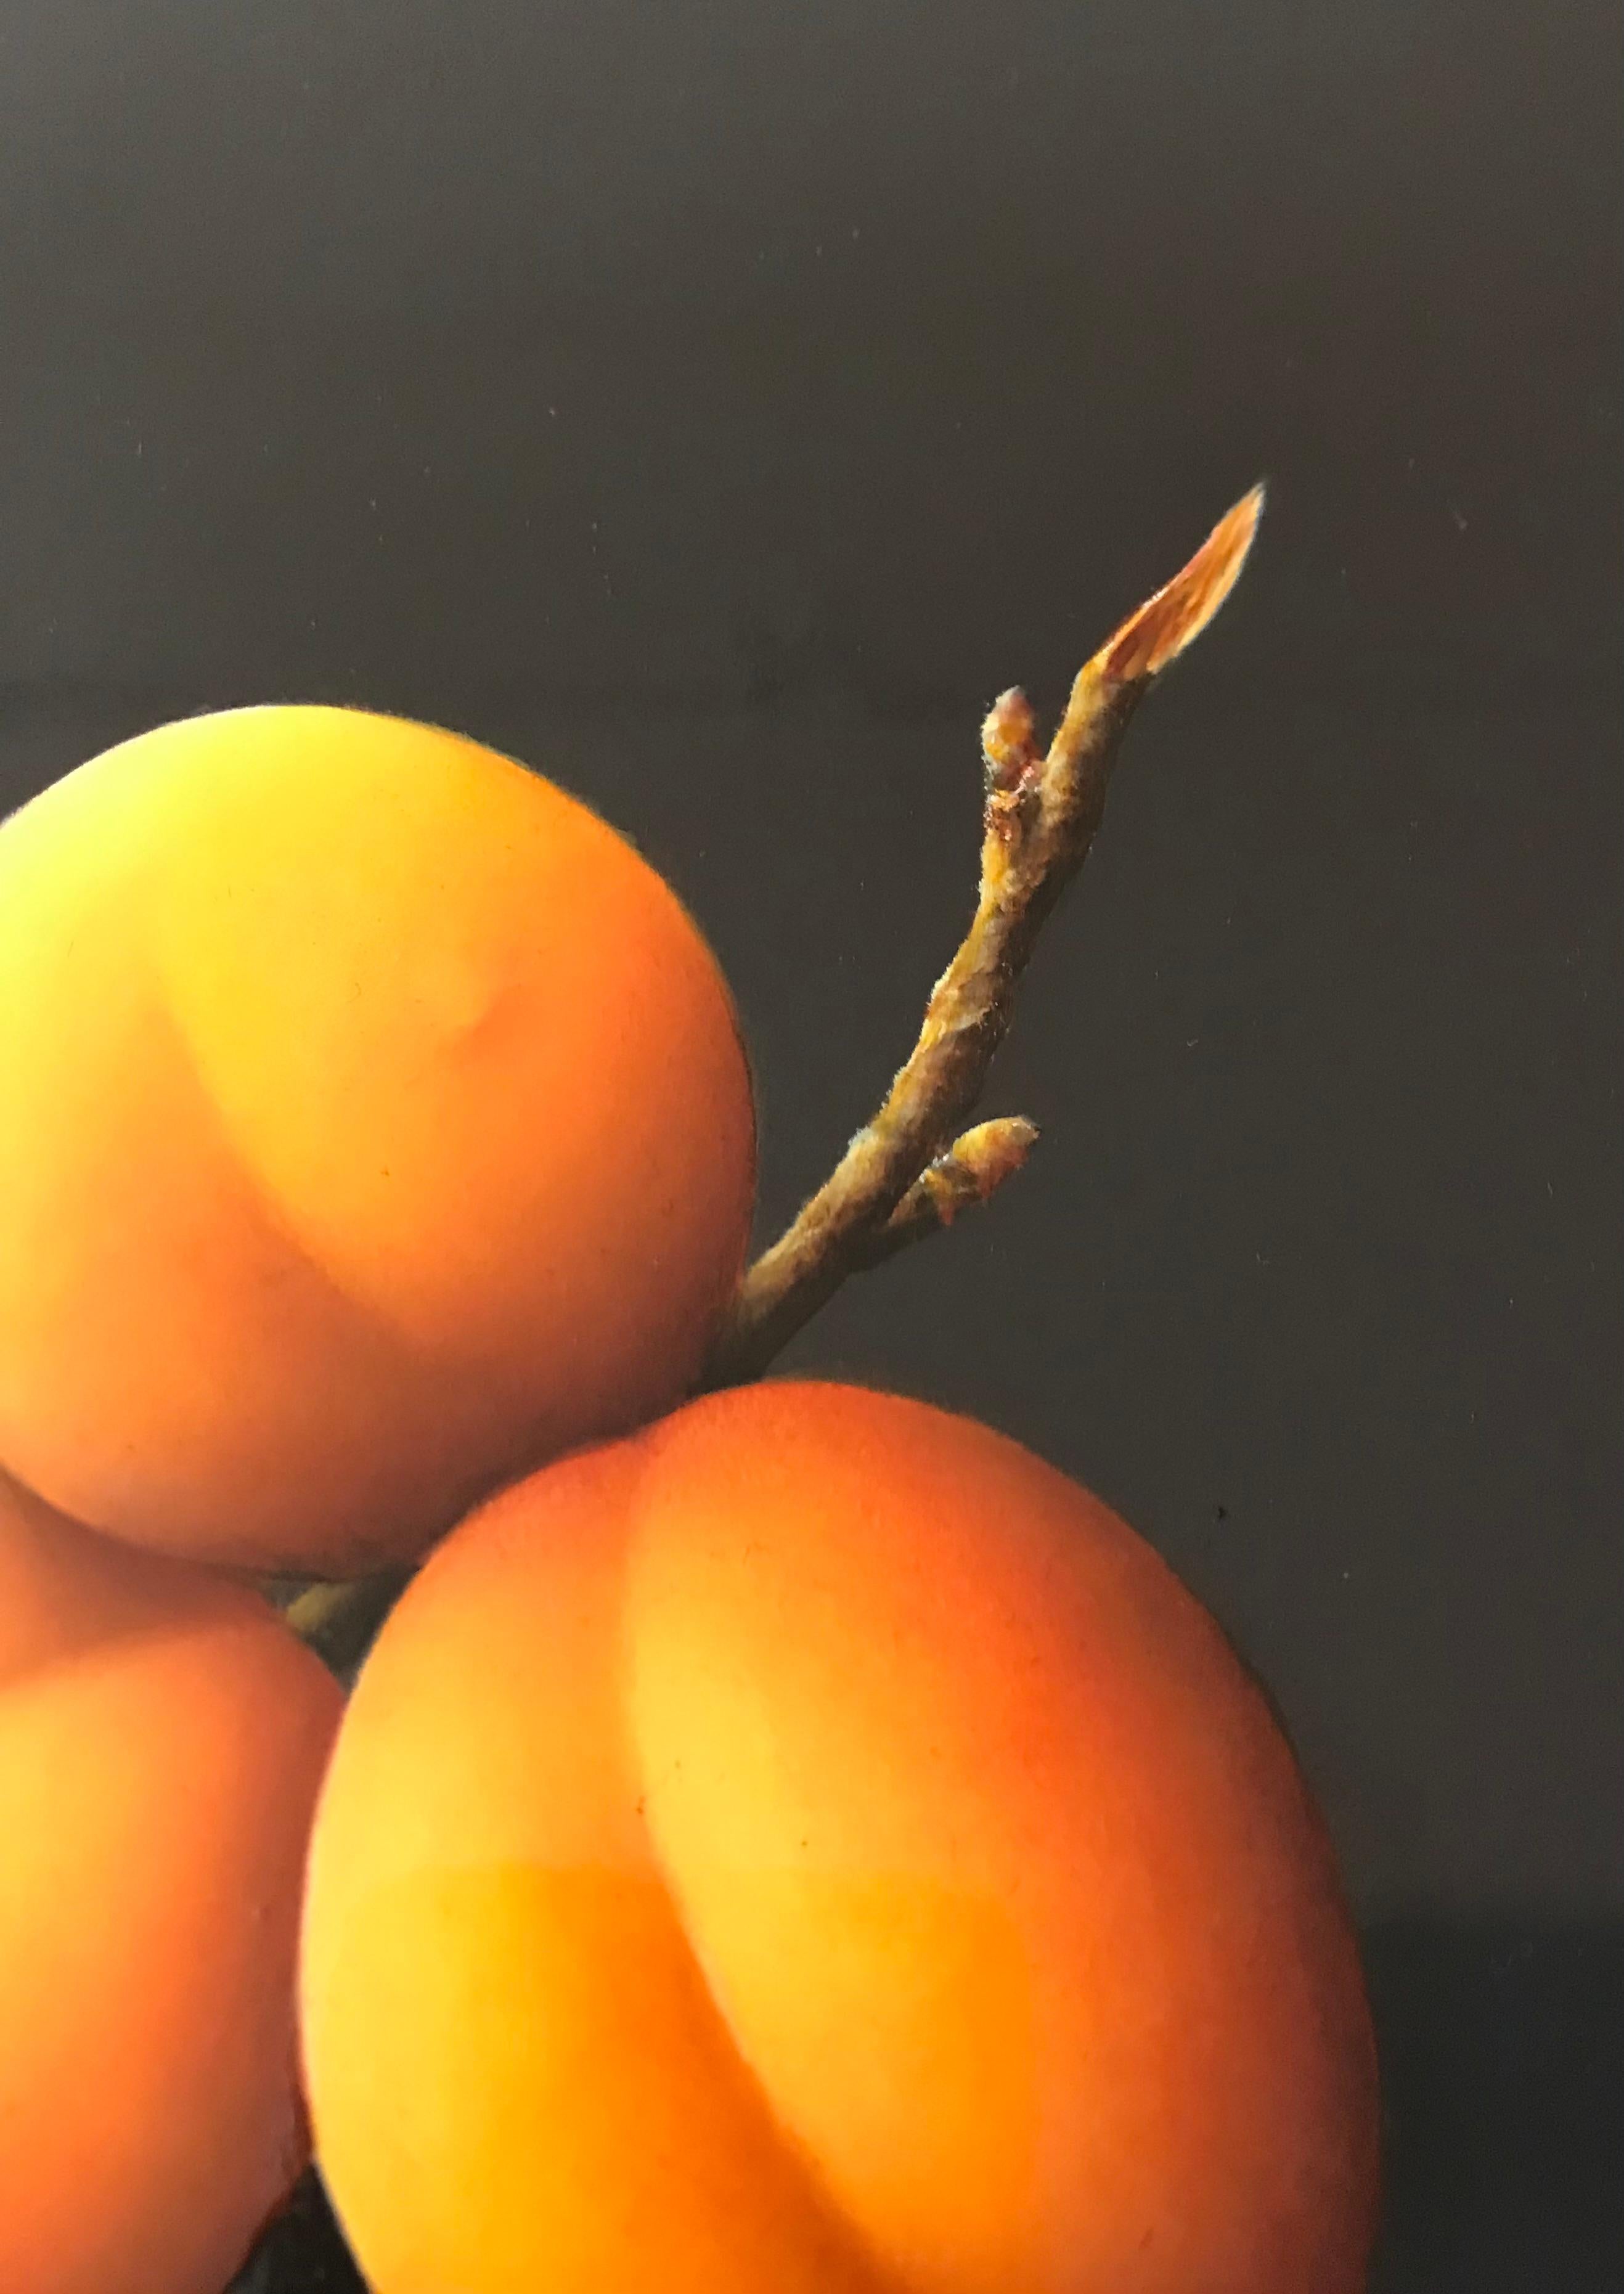 “Apricots” Contemporary Fine Realist Still-Life Painting of Apricots, Fruit - Black Figurative Painting by René Smoorenburg 